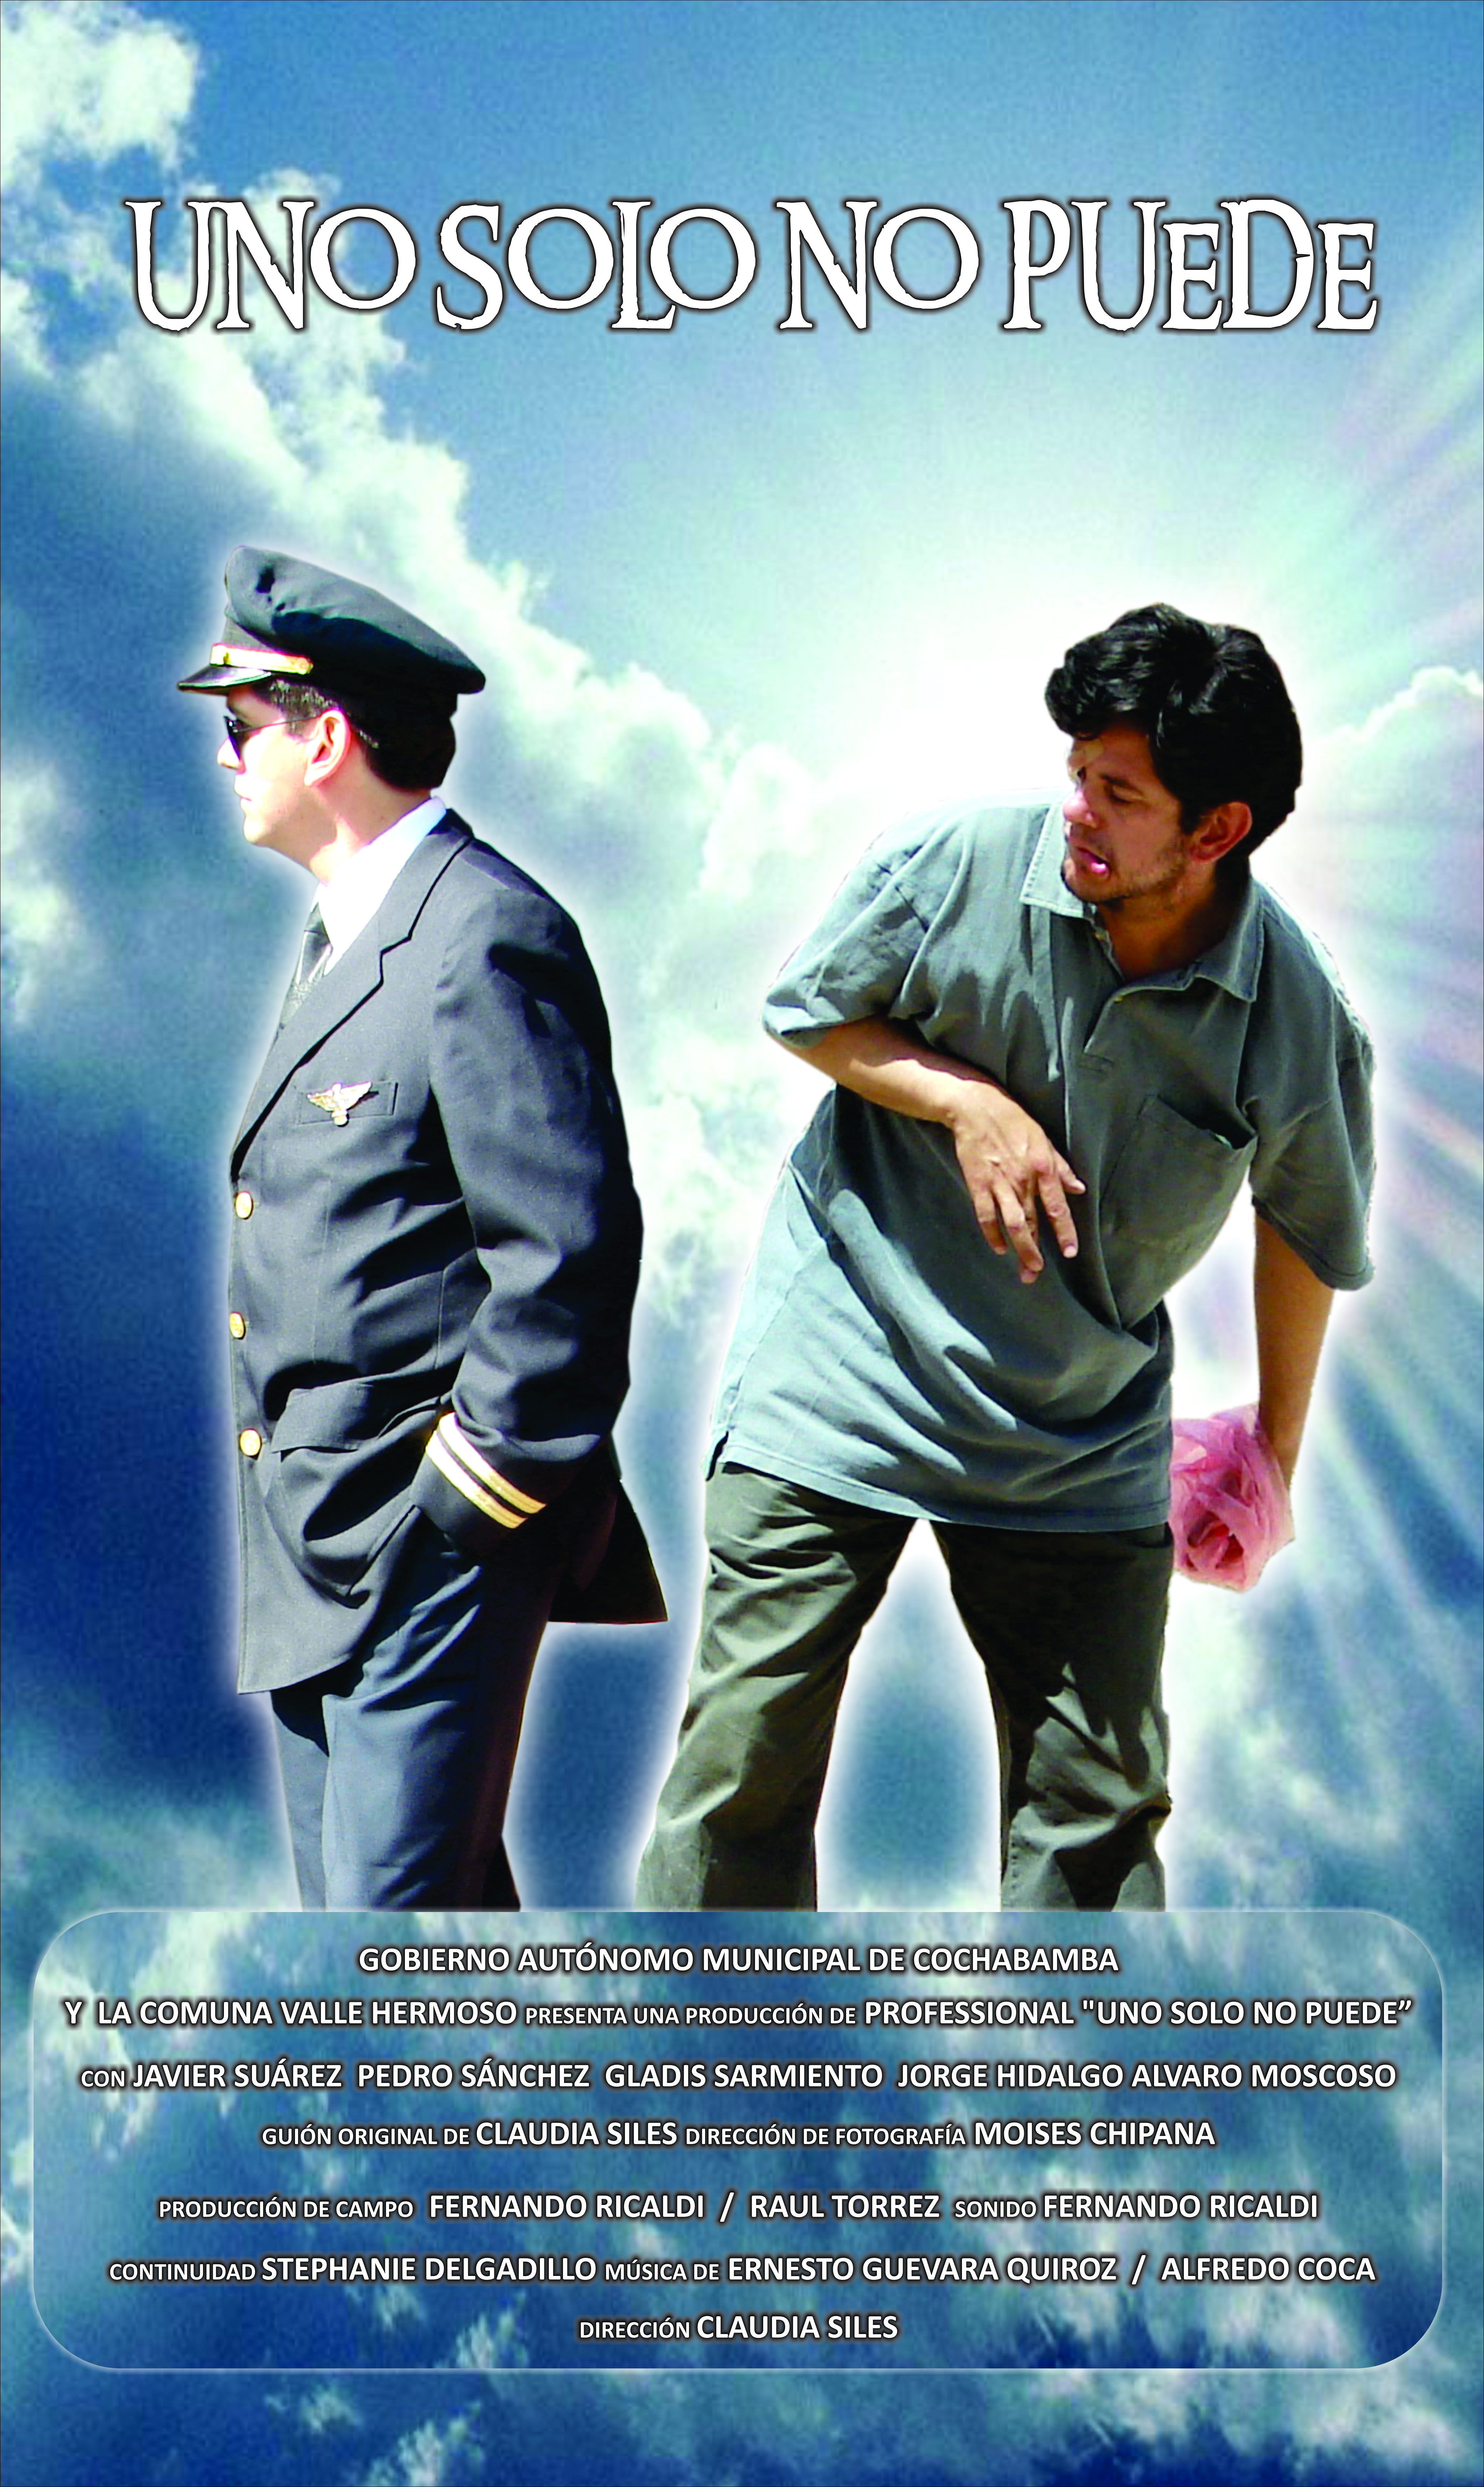 Javier B. Suarez on the dvd cover of Can't do it alone